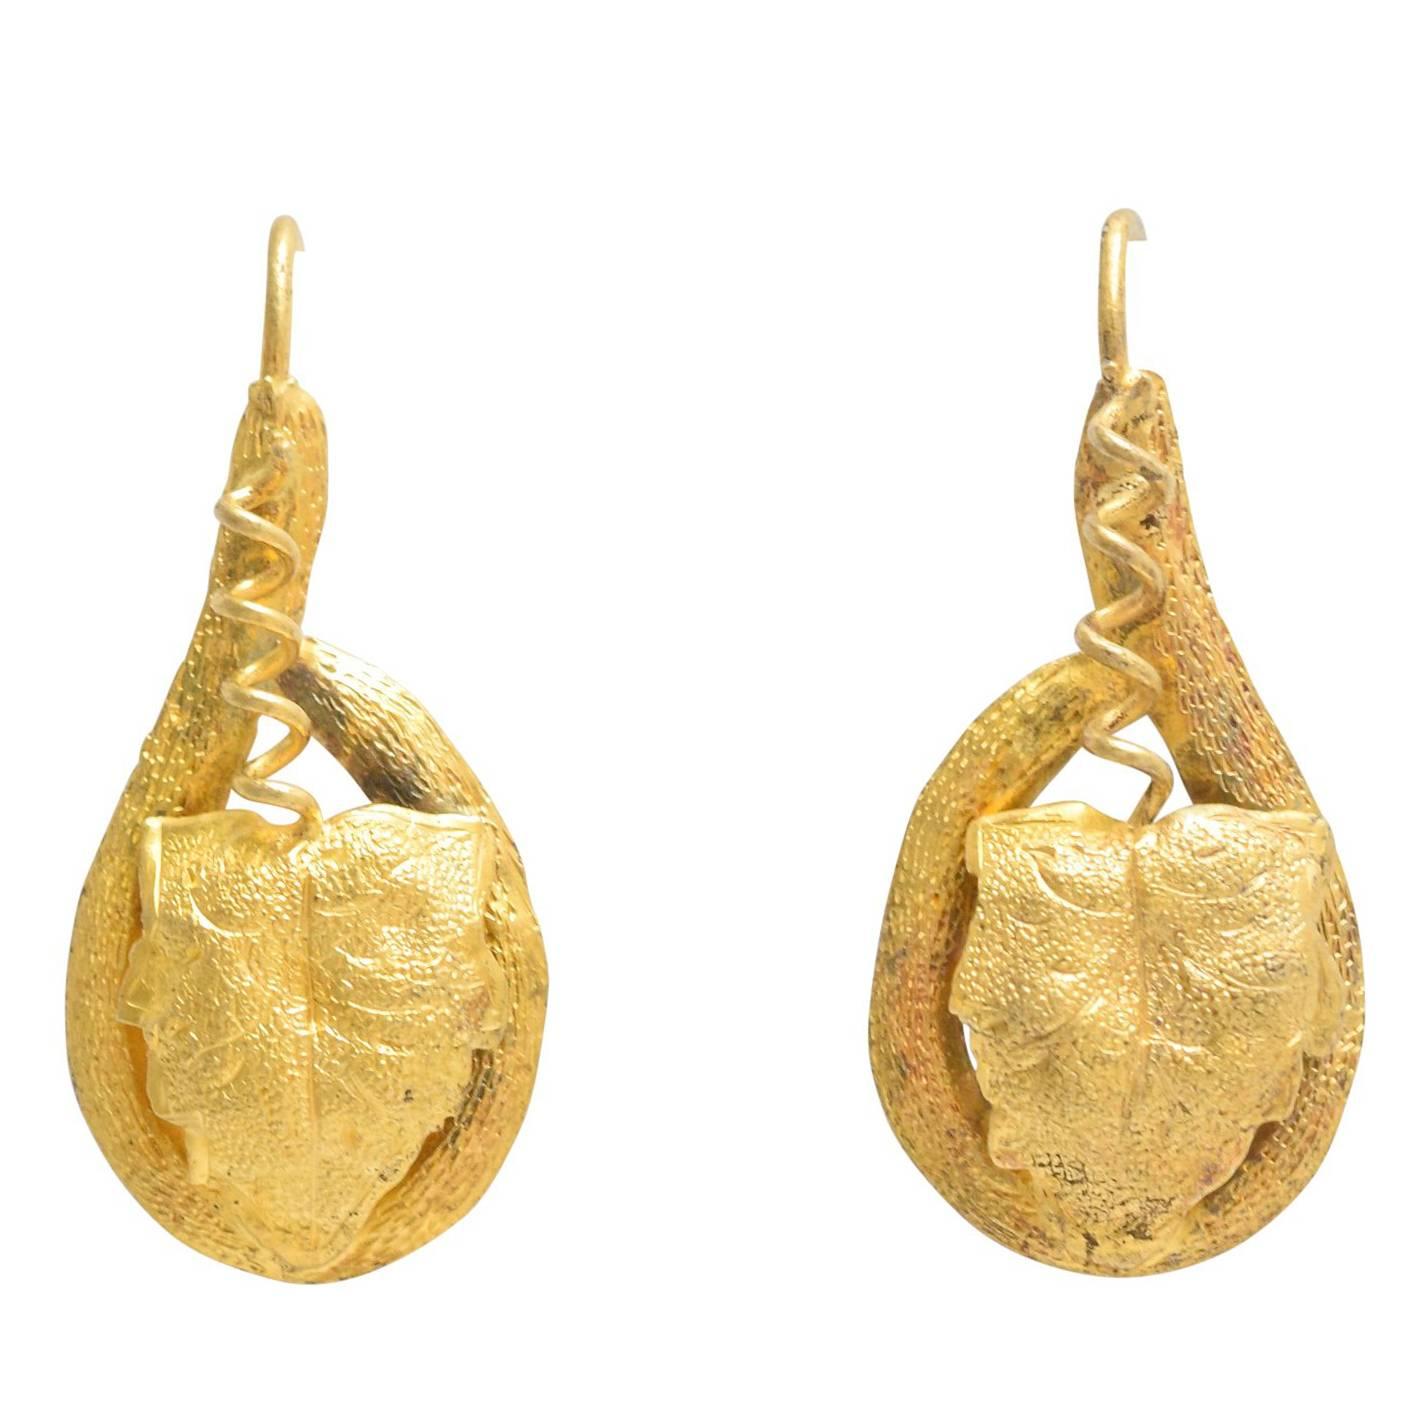 Victorian Gold "Leaf and Vine" Earrings